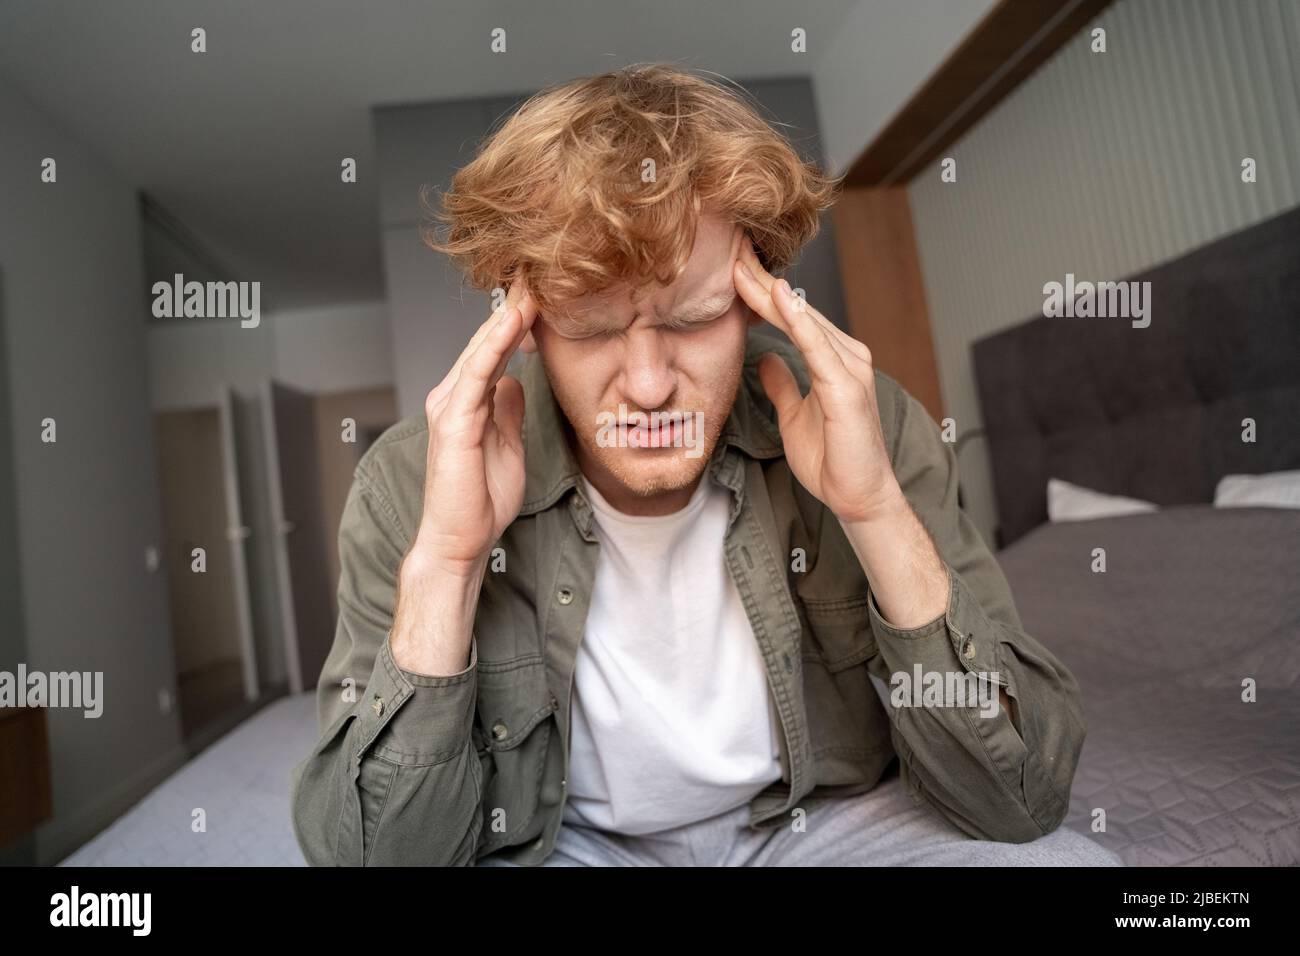 Young ginger man suffering from terrible headache or migraine closeup shot Stock Photo